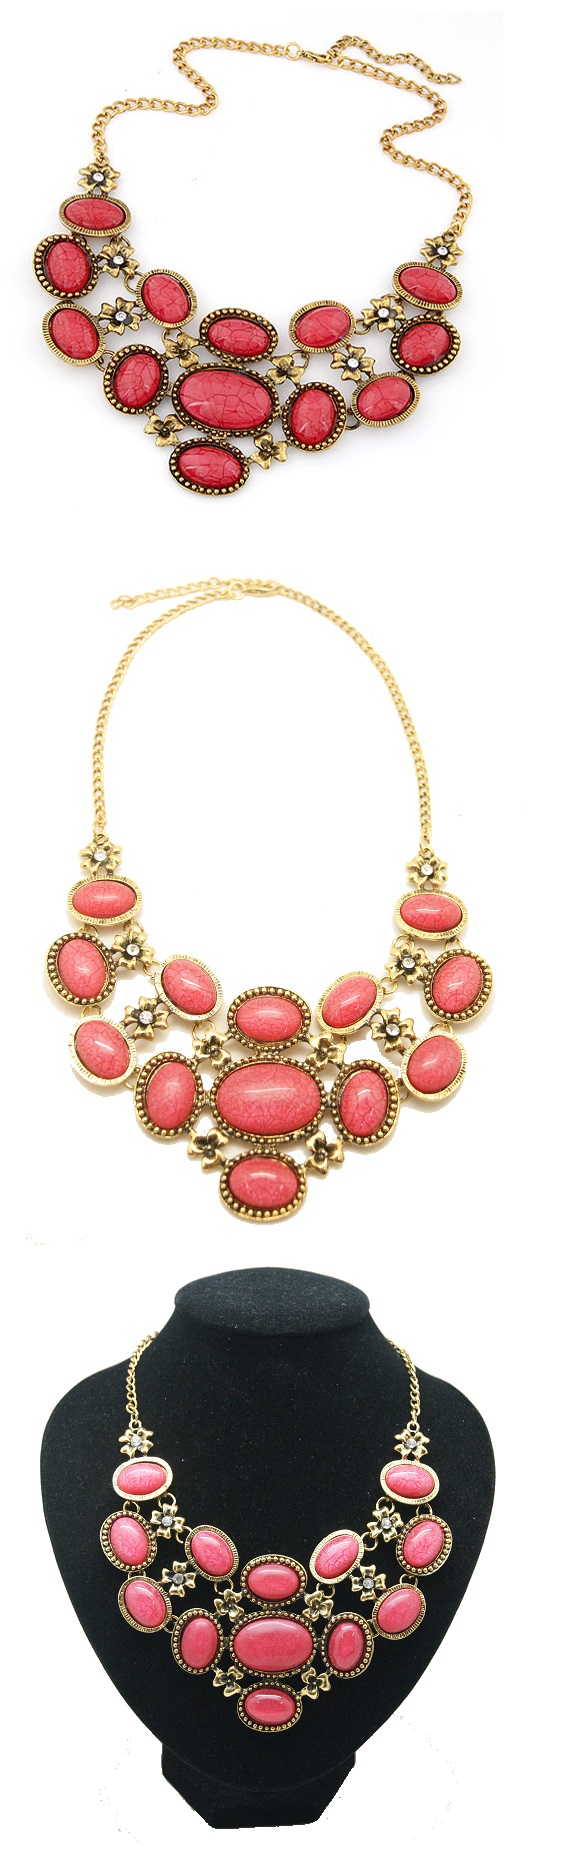 C014031207 Red elegance beads statement necklace accessories